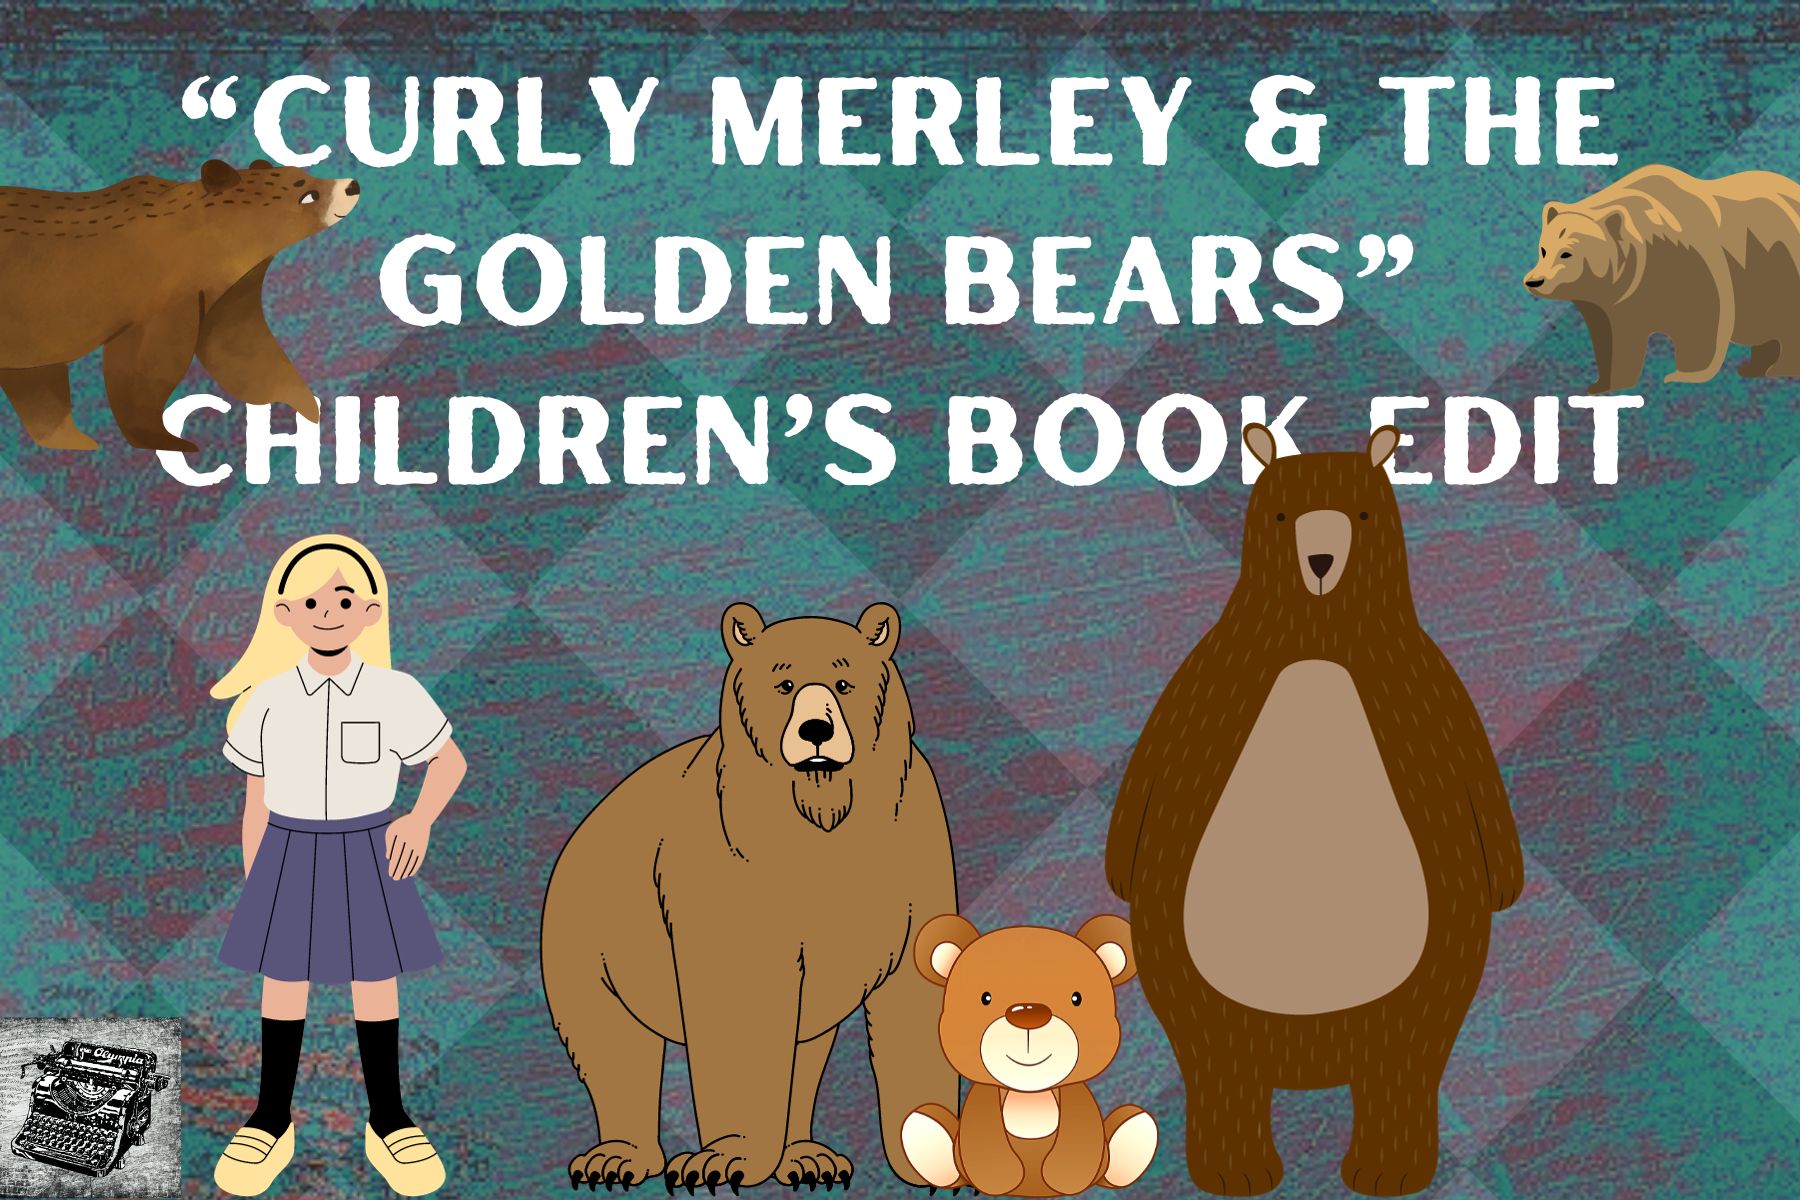 ‘Curley Merley and The Golden Bears’ – Children’s Book Editing Example